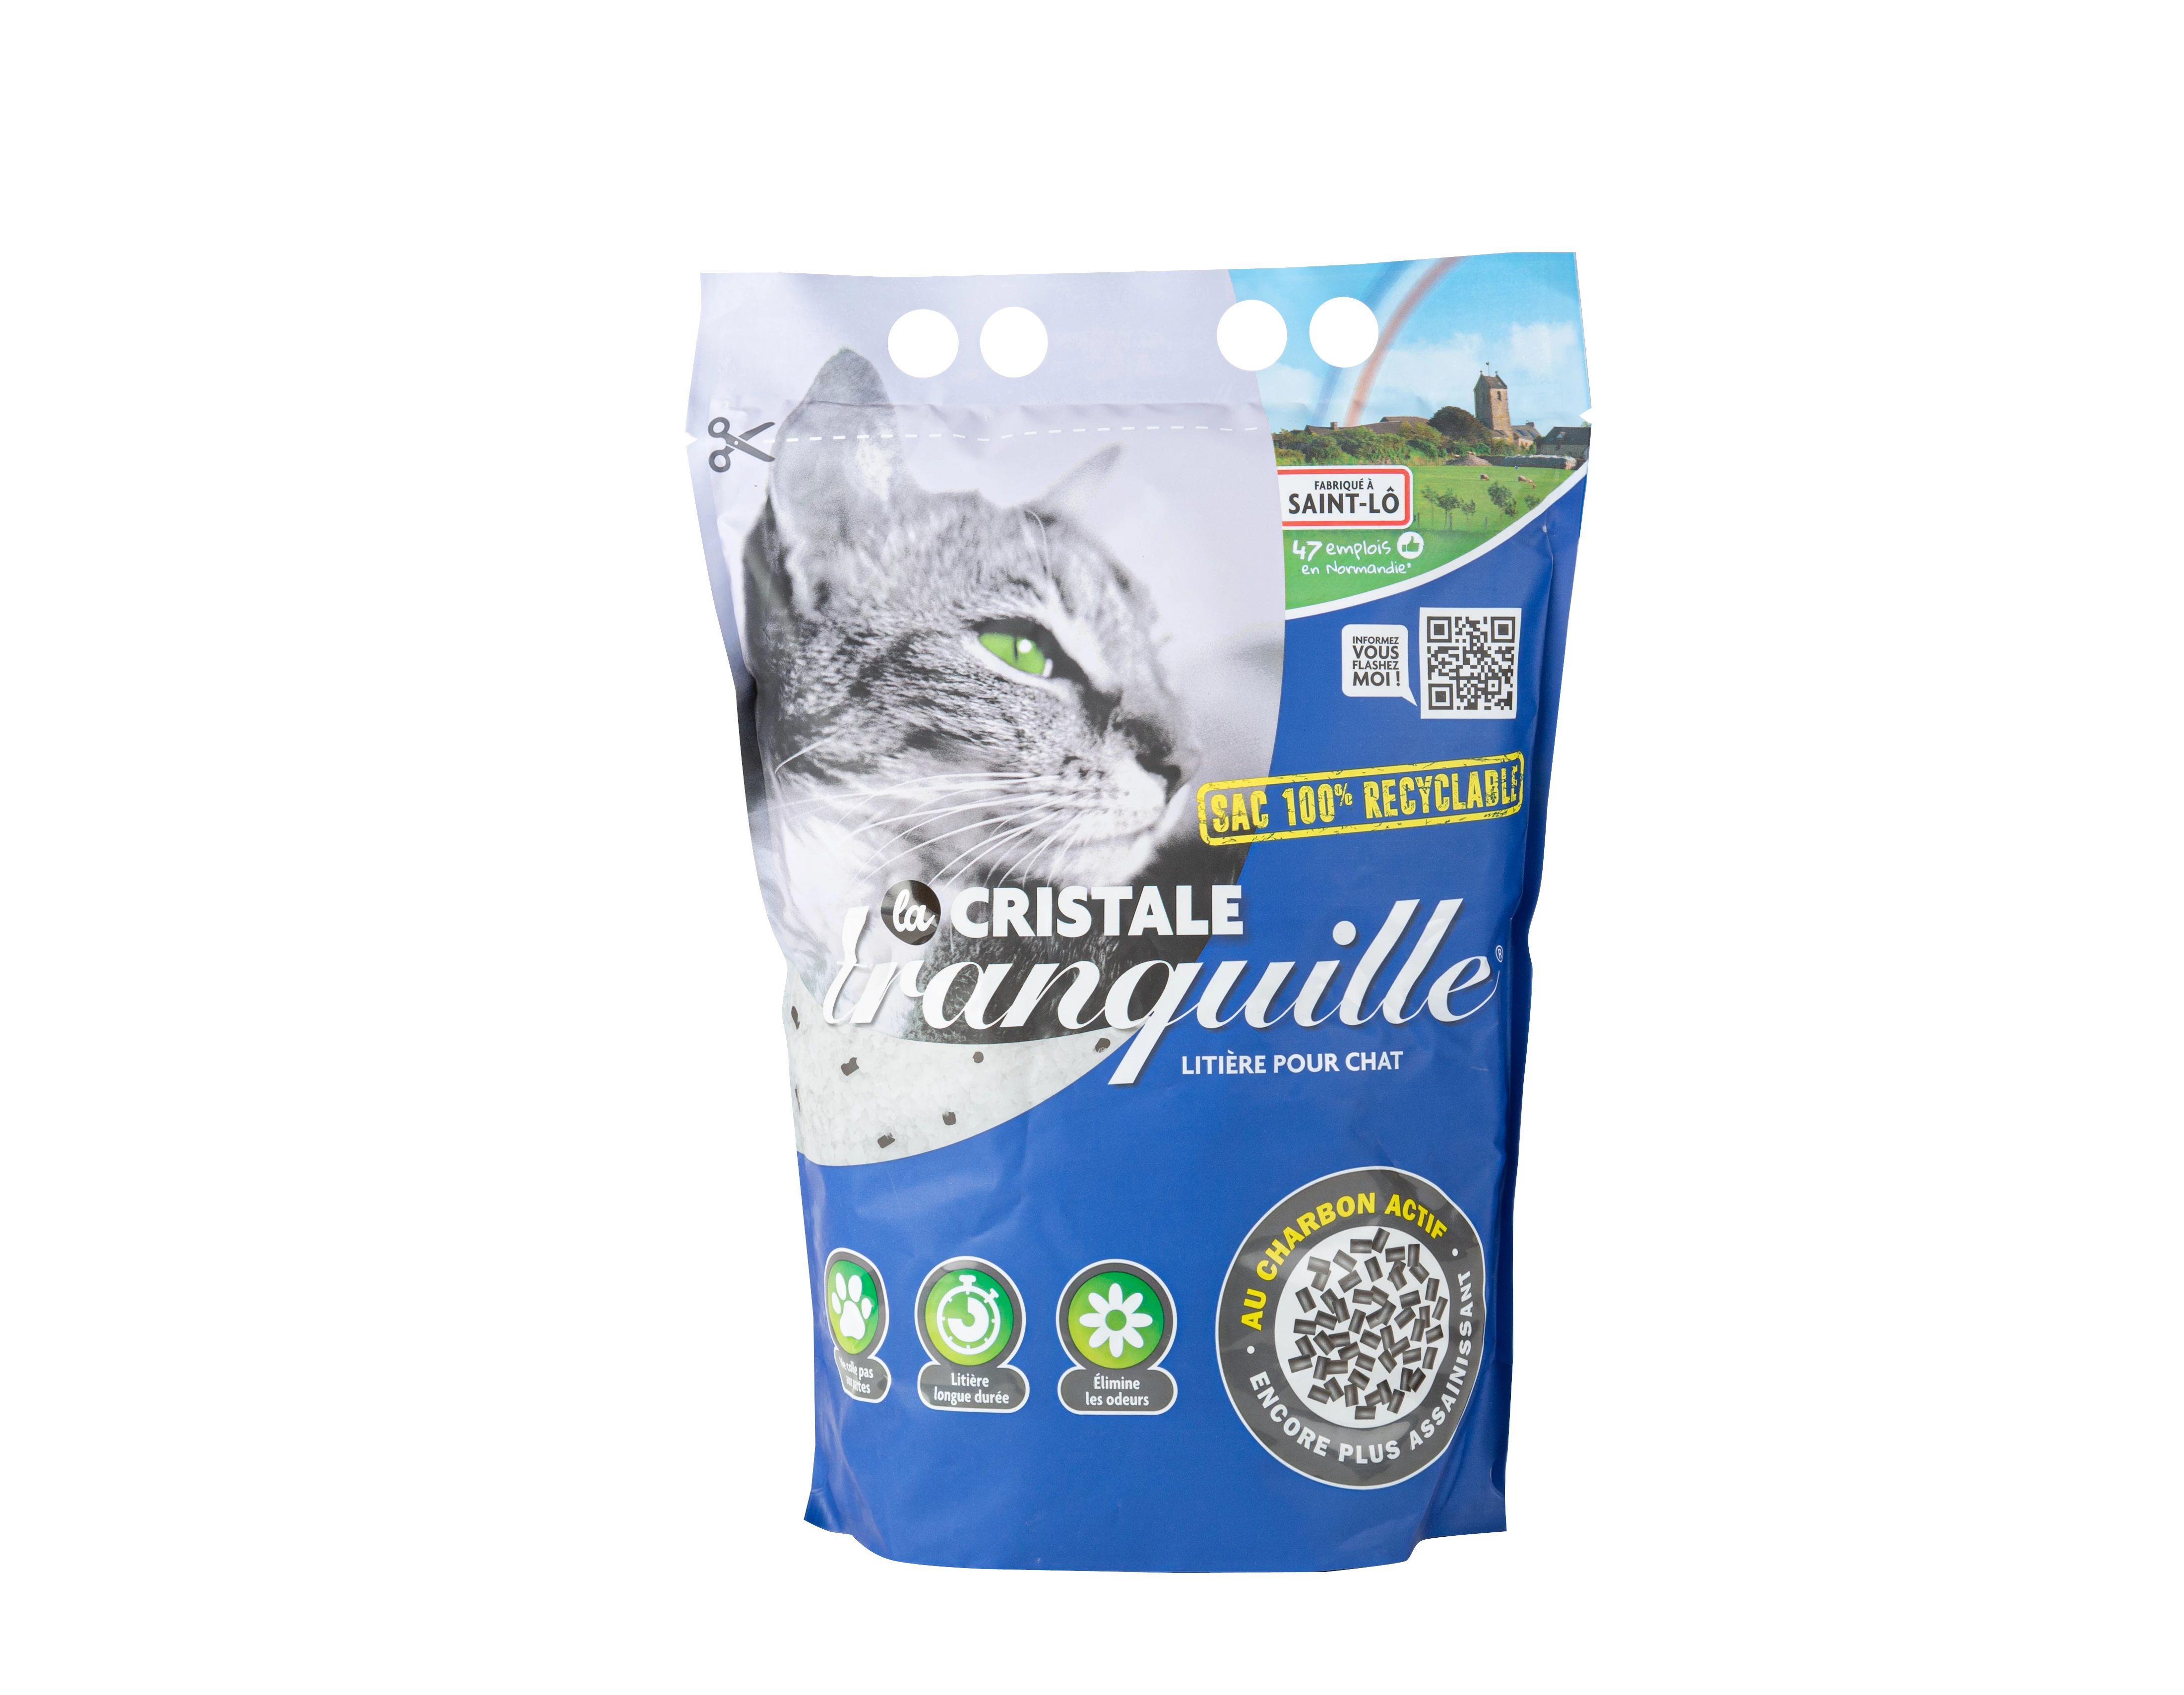 Activated carbon crystal litter 3.95L - TRANQUILLE